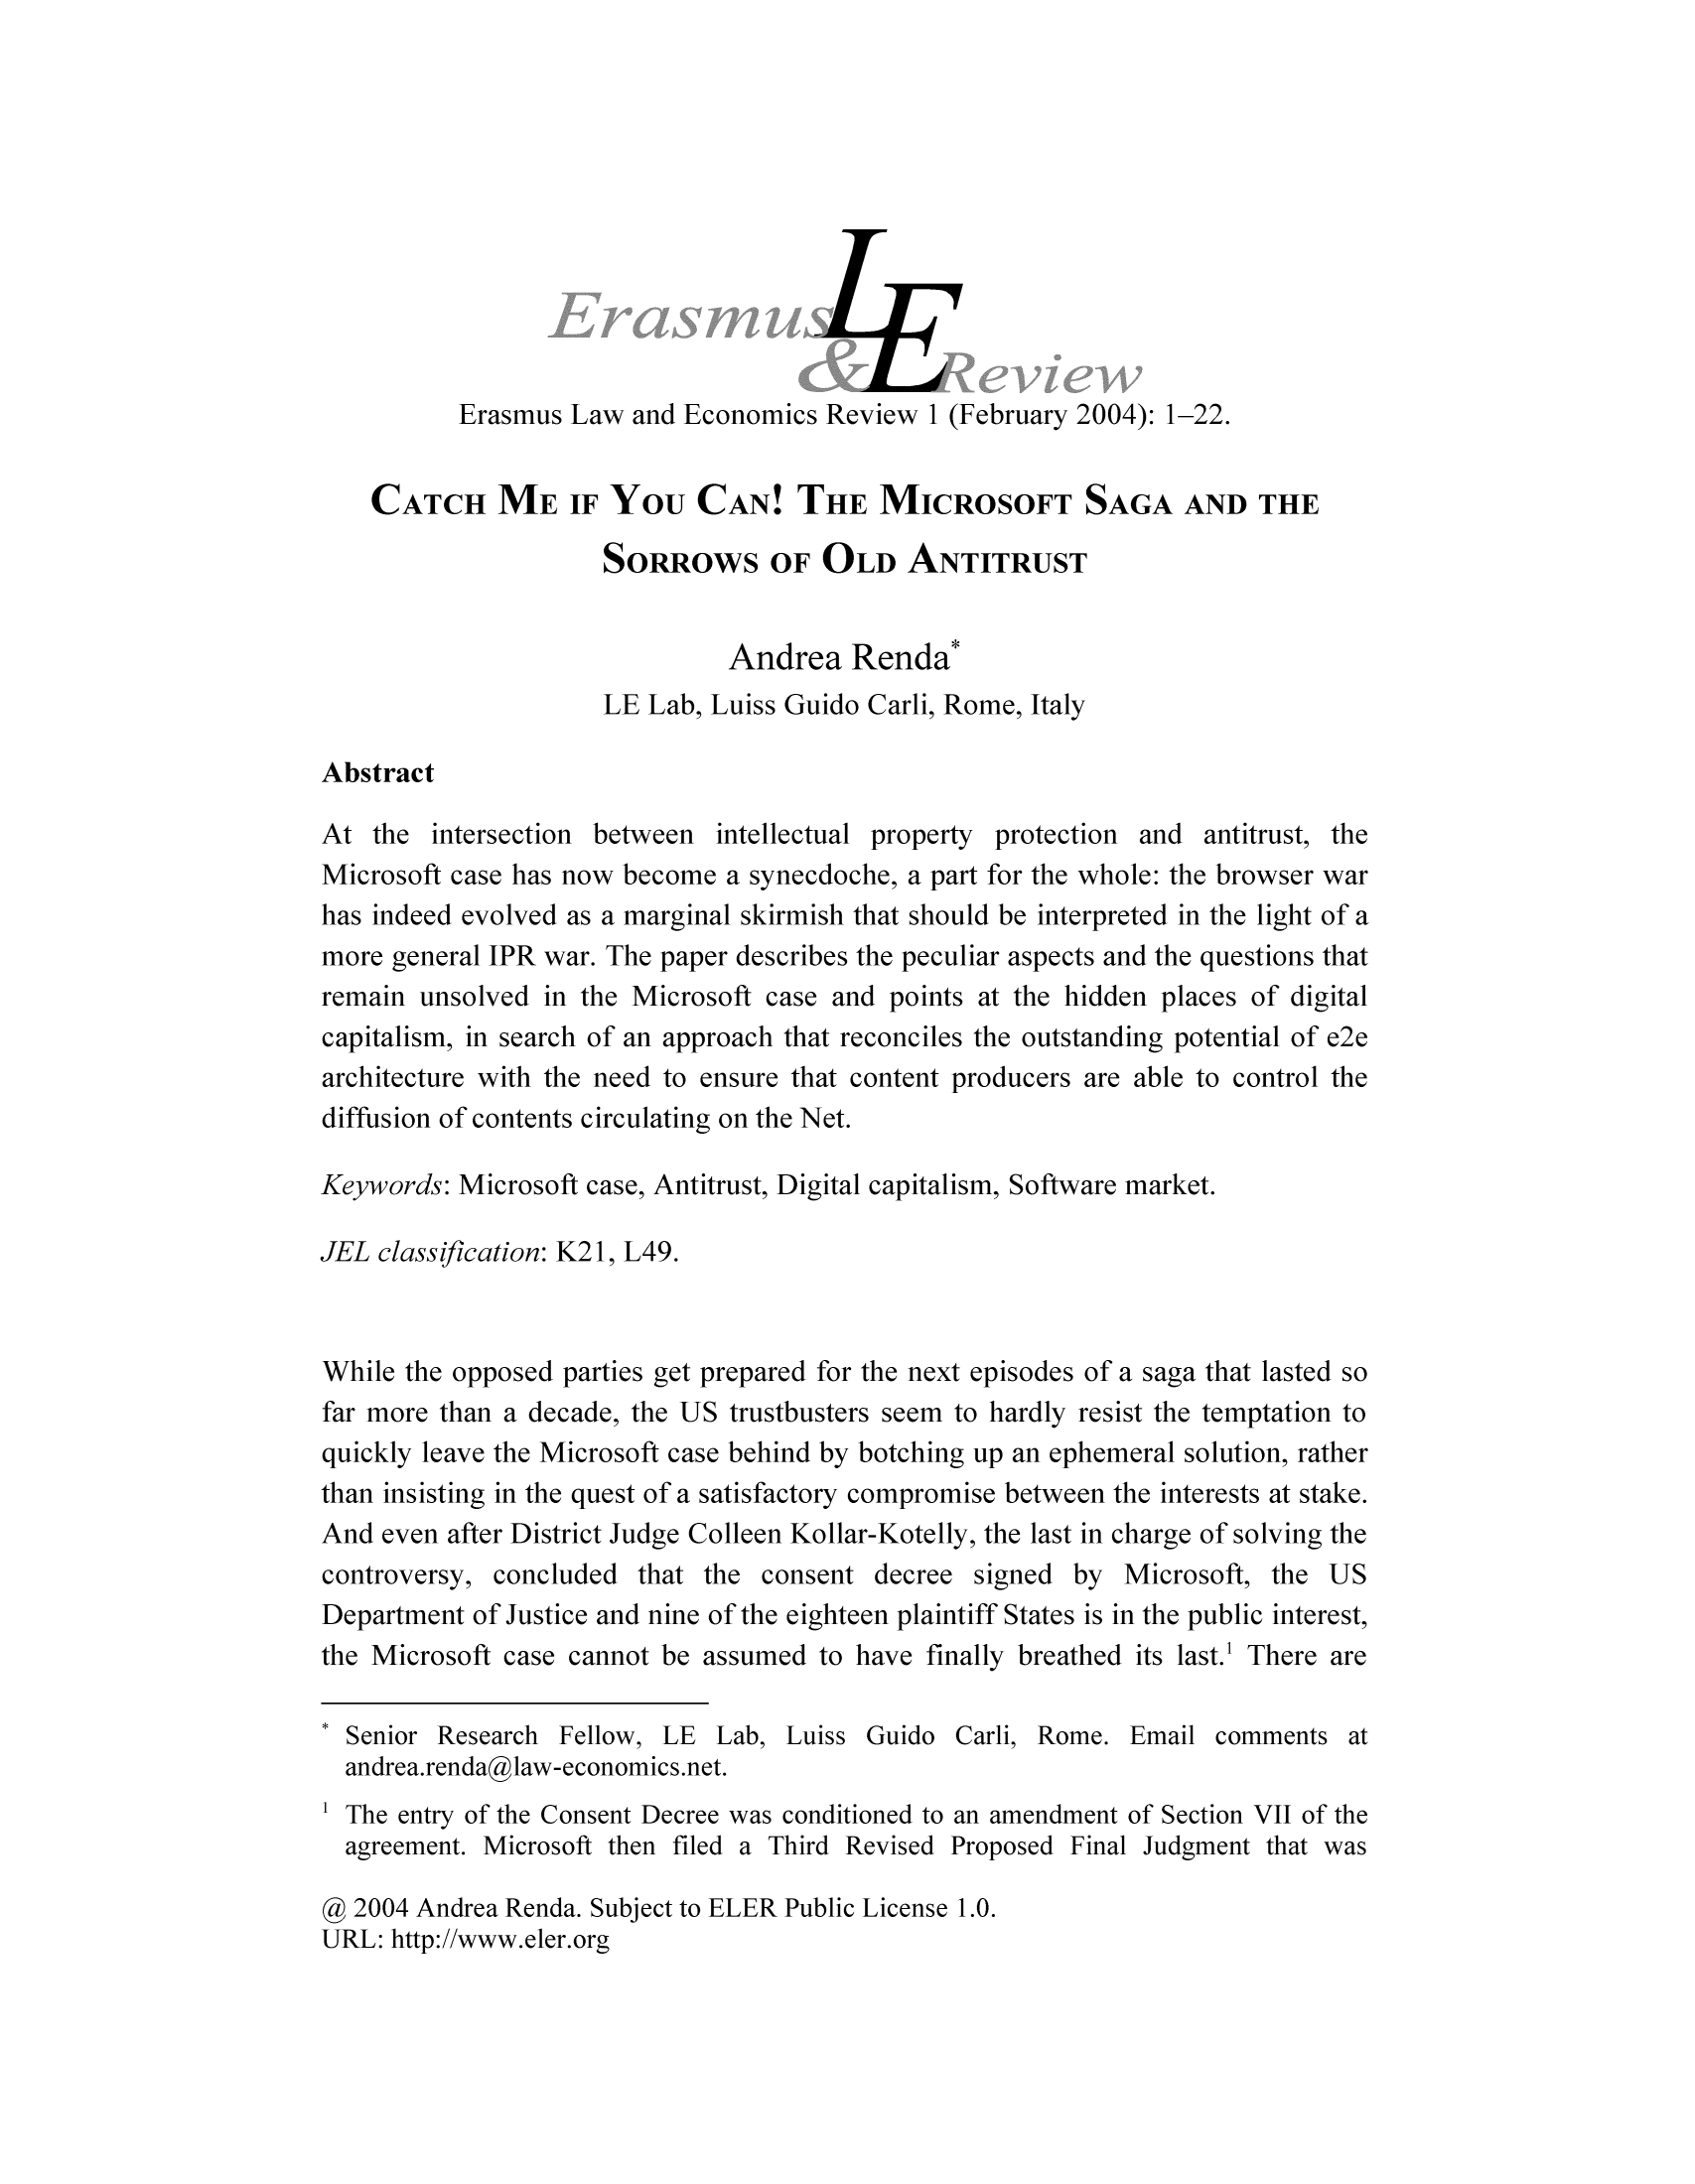 handle is hein.journals/erascomr1 and id is 1 raw text is: Erasmus Law and Economics Review 1 (February 2004): 1-22.

CATCH ME IF YOU CAN! THE MICROSOFT SAGA AND THE
SORROWS OF OLD ANTITRUST
Andrea Renda*
LE Lab, Luiss Guido Carli, Rome, Italy
Abstract
At the intersection between intellectual property protection and antitrust, the
Microsoft case has now become a synecdoche, a part for the whole: the browser war
has indeed evolved as a marginal skirmish that should be interpreted in the light of a
more general IPR war. The paper describes the peculiar aspects and the questions that
remain unsolved in the Microsoft case and points at the hidden places of digital
capitalism, in search of an approach that reconciles the outstanding potential of e2e
architecture with the need to ensure that content producers are able to control the
diffusion of contents circulating on the Net.
Keywords: Microsoft case, Antitrust, Digital capitalism, Software market.
JEL classification: K21, L49.
While the opposed parties get prepared for the next episodes of a saga that lasted so
far more than a decade, the US trustbusters seem to hardly resist the temptation to
quickly leave the Microsoft case behind by botching up an ephemeral solution, rather
than insisting in the quest of a satisfactory compromise between the interests at stake.
And even after District Judge Colleen Kollar-Kotelly, the last in charge of solving the
controversy, concluded that the consent decree signed by Microsoft, the US
Department of Justice and nine of the eighteen plaintiff States is in the public interest,
the Microsoft case cannot be assumed to have finally breathed its last.' There are
Senior Research Fellow, LE Lab, Luiss Guido Carli, Rome. Email comments at
andrea.renda@law-economics.net.
The entry of the Consent Decree was conditioned to an amendment of Section VII of the
agreement. Microsoft then filed a Third Revised Proposed Final Judgment that was
@ 2004 Andrea Renda. Subject to ELER Public License 1.0.
URL: http://www.eler.org


